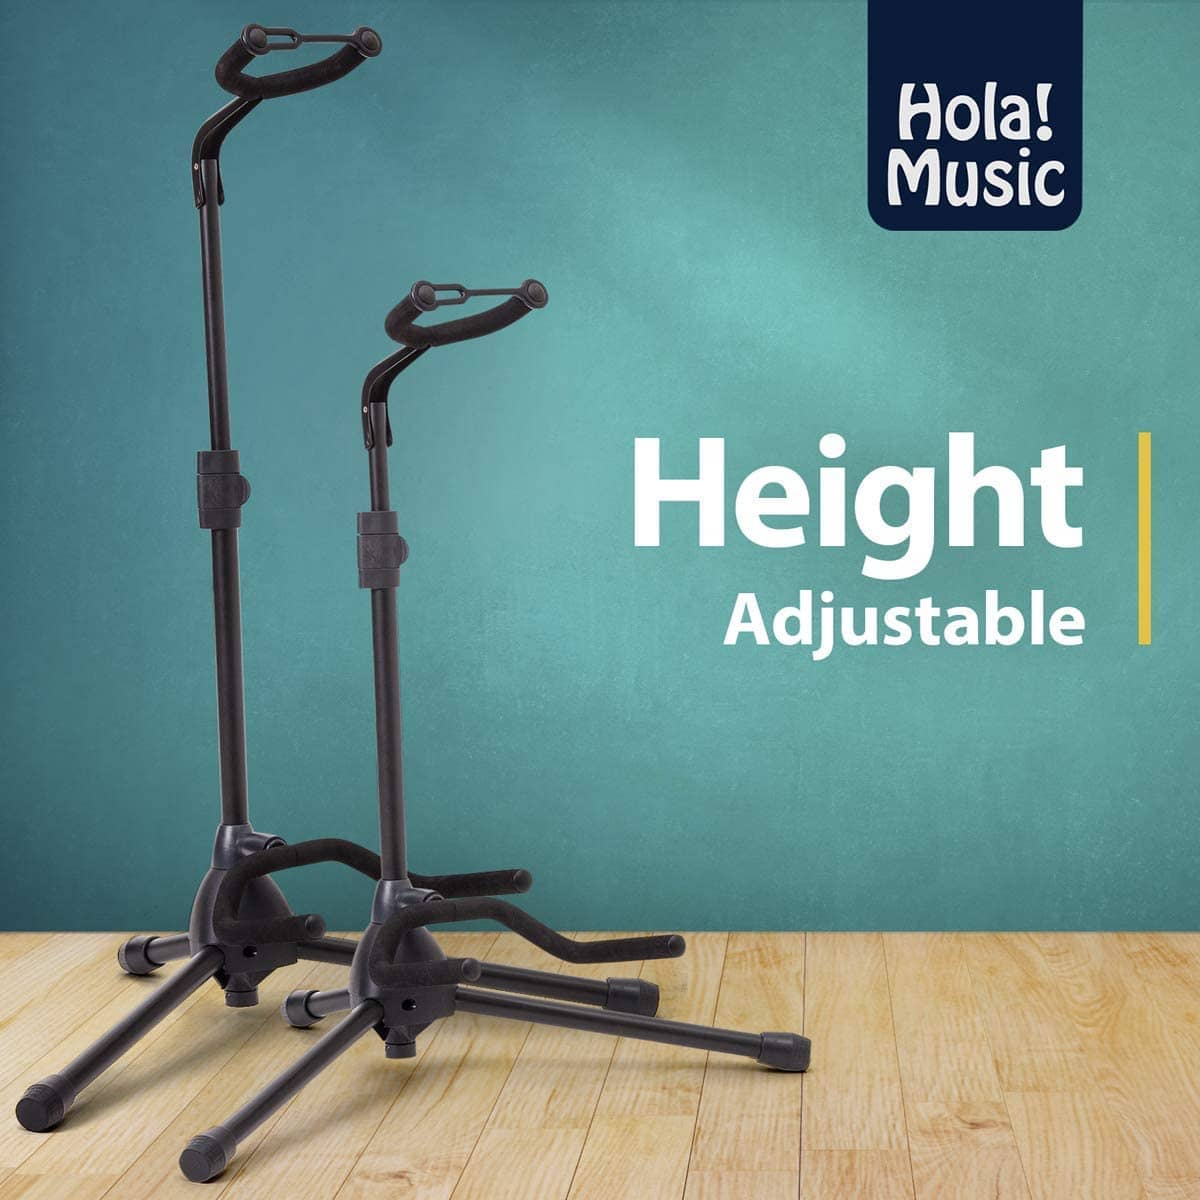 Pack of 2 – Universal Guitar Stand by Hola! Music – Fits Acoustic, Classical, Electric, Bass Guitars, Mandolins, Banjos, Ukuleles and Other Stringed Instruments 10